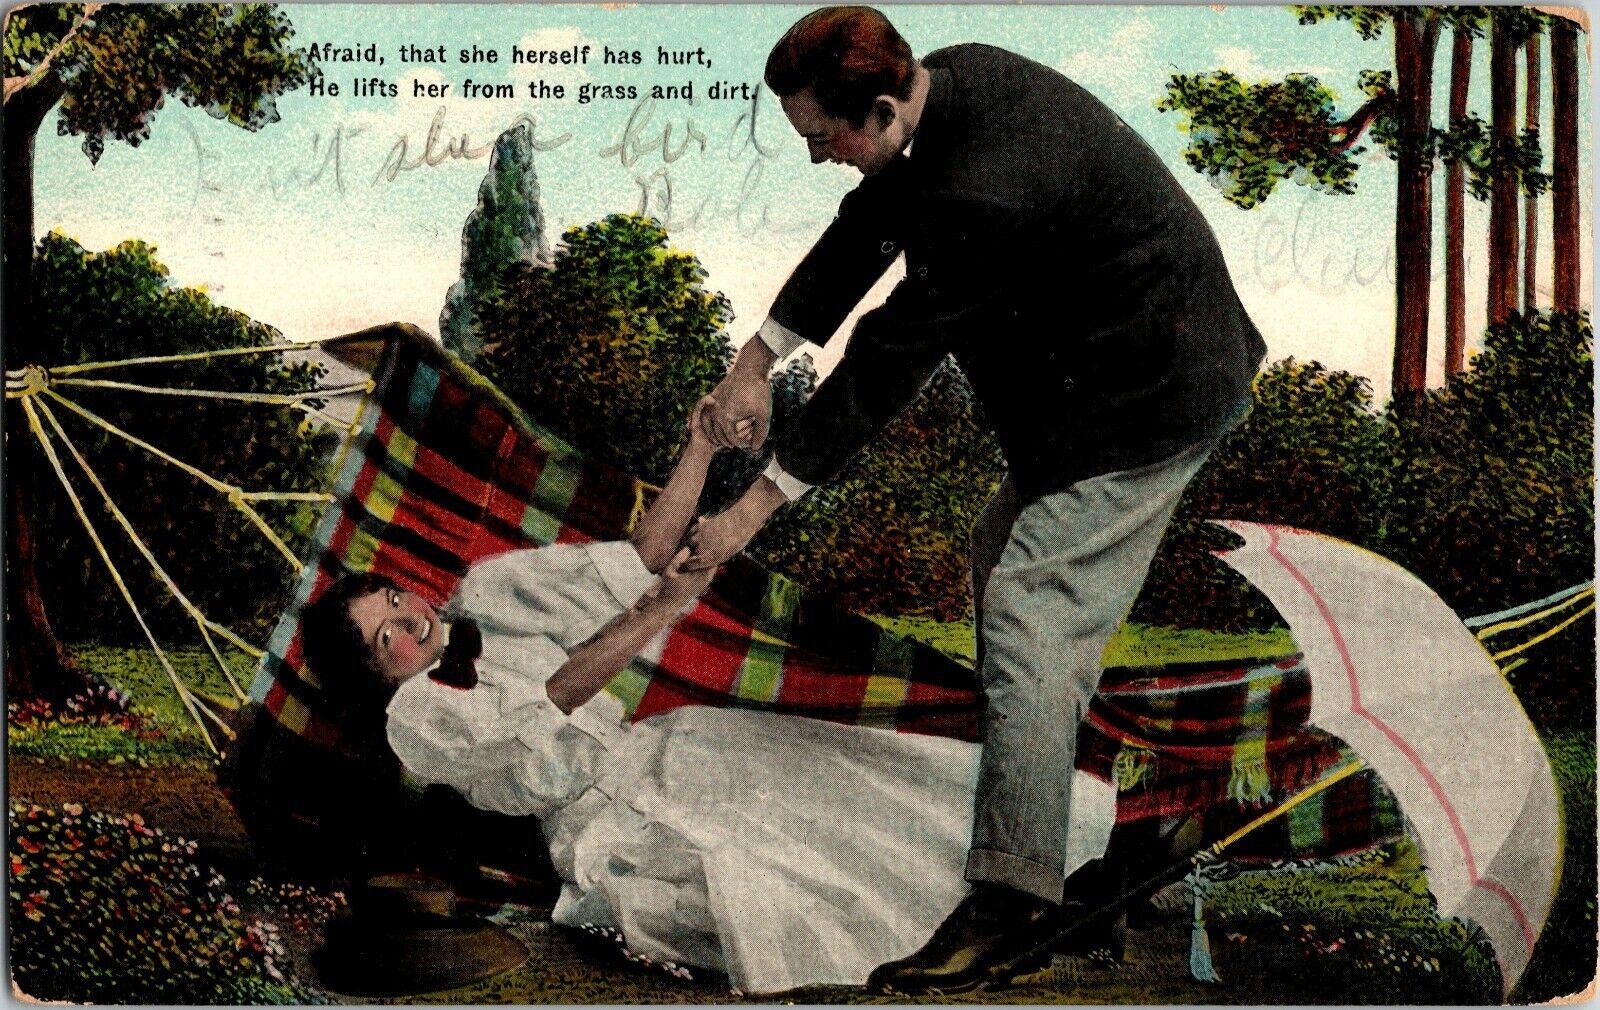 Afraid that she herself has hurt he lifts her from the dirt & Grass 1908 